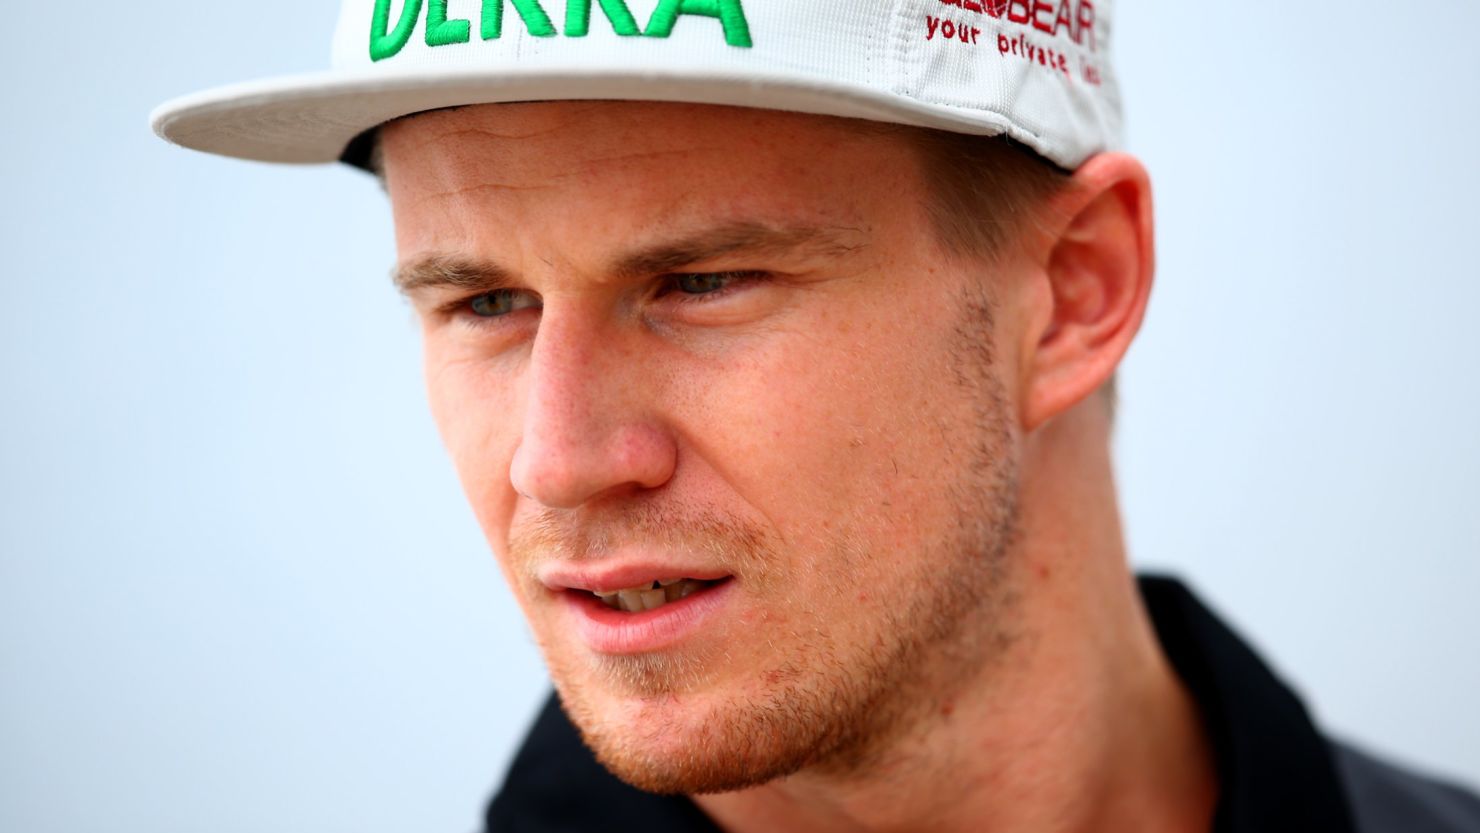 The familiar face of Nico Hulkenberg is set to stay on the F1 grid for the next two seasons.